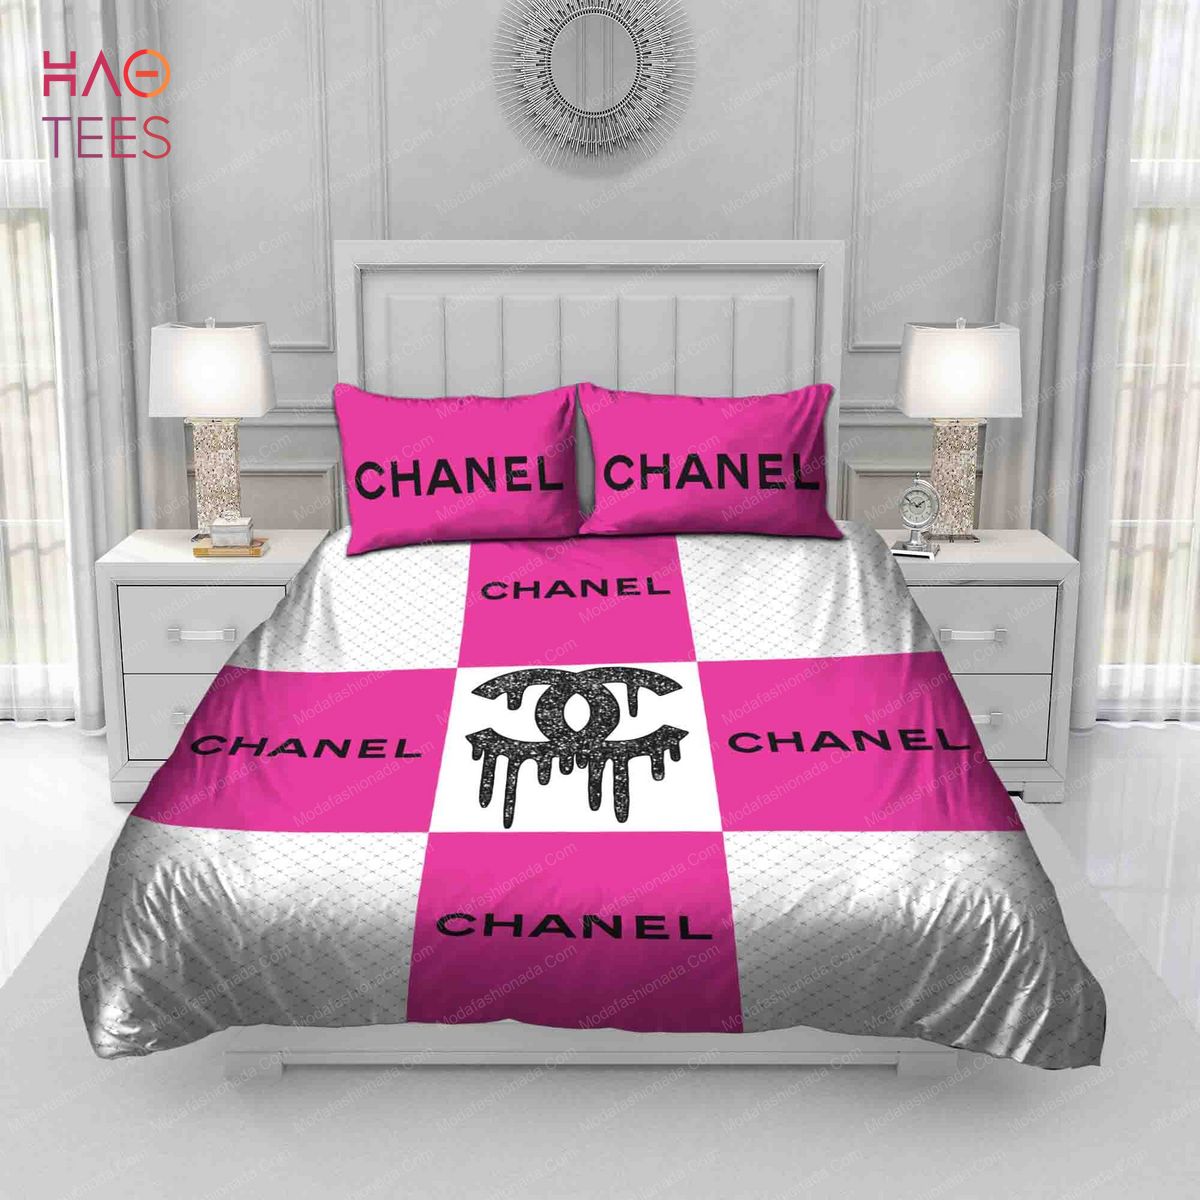 Elegance designer bedding uk limited  CHANEL COMPLETE SET KINGSIZE sleep  in style with this chanel complete set which includes 1 duvet cover 1  fitted sheet 2 pillowcases kingsize3000 NOW OUT OF STOCK   Facebook